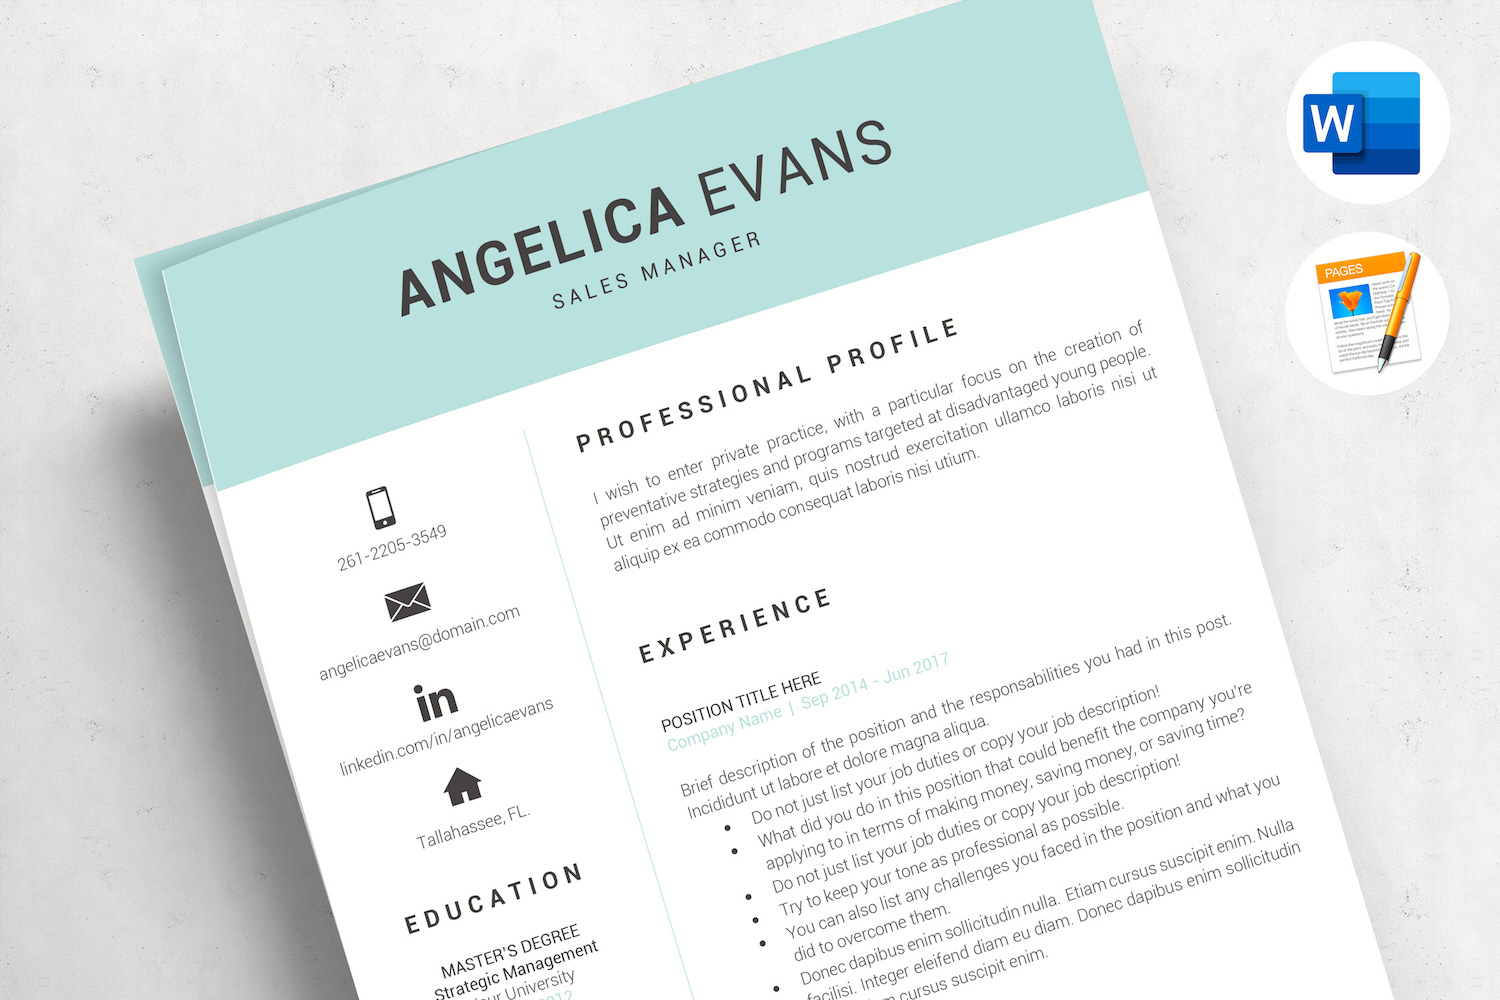 ANGELICA - Sales Resume for MS Word and Mac Pages and matching cover letter & references